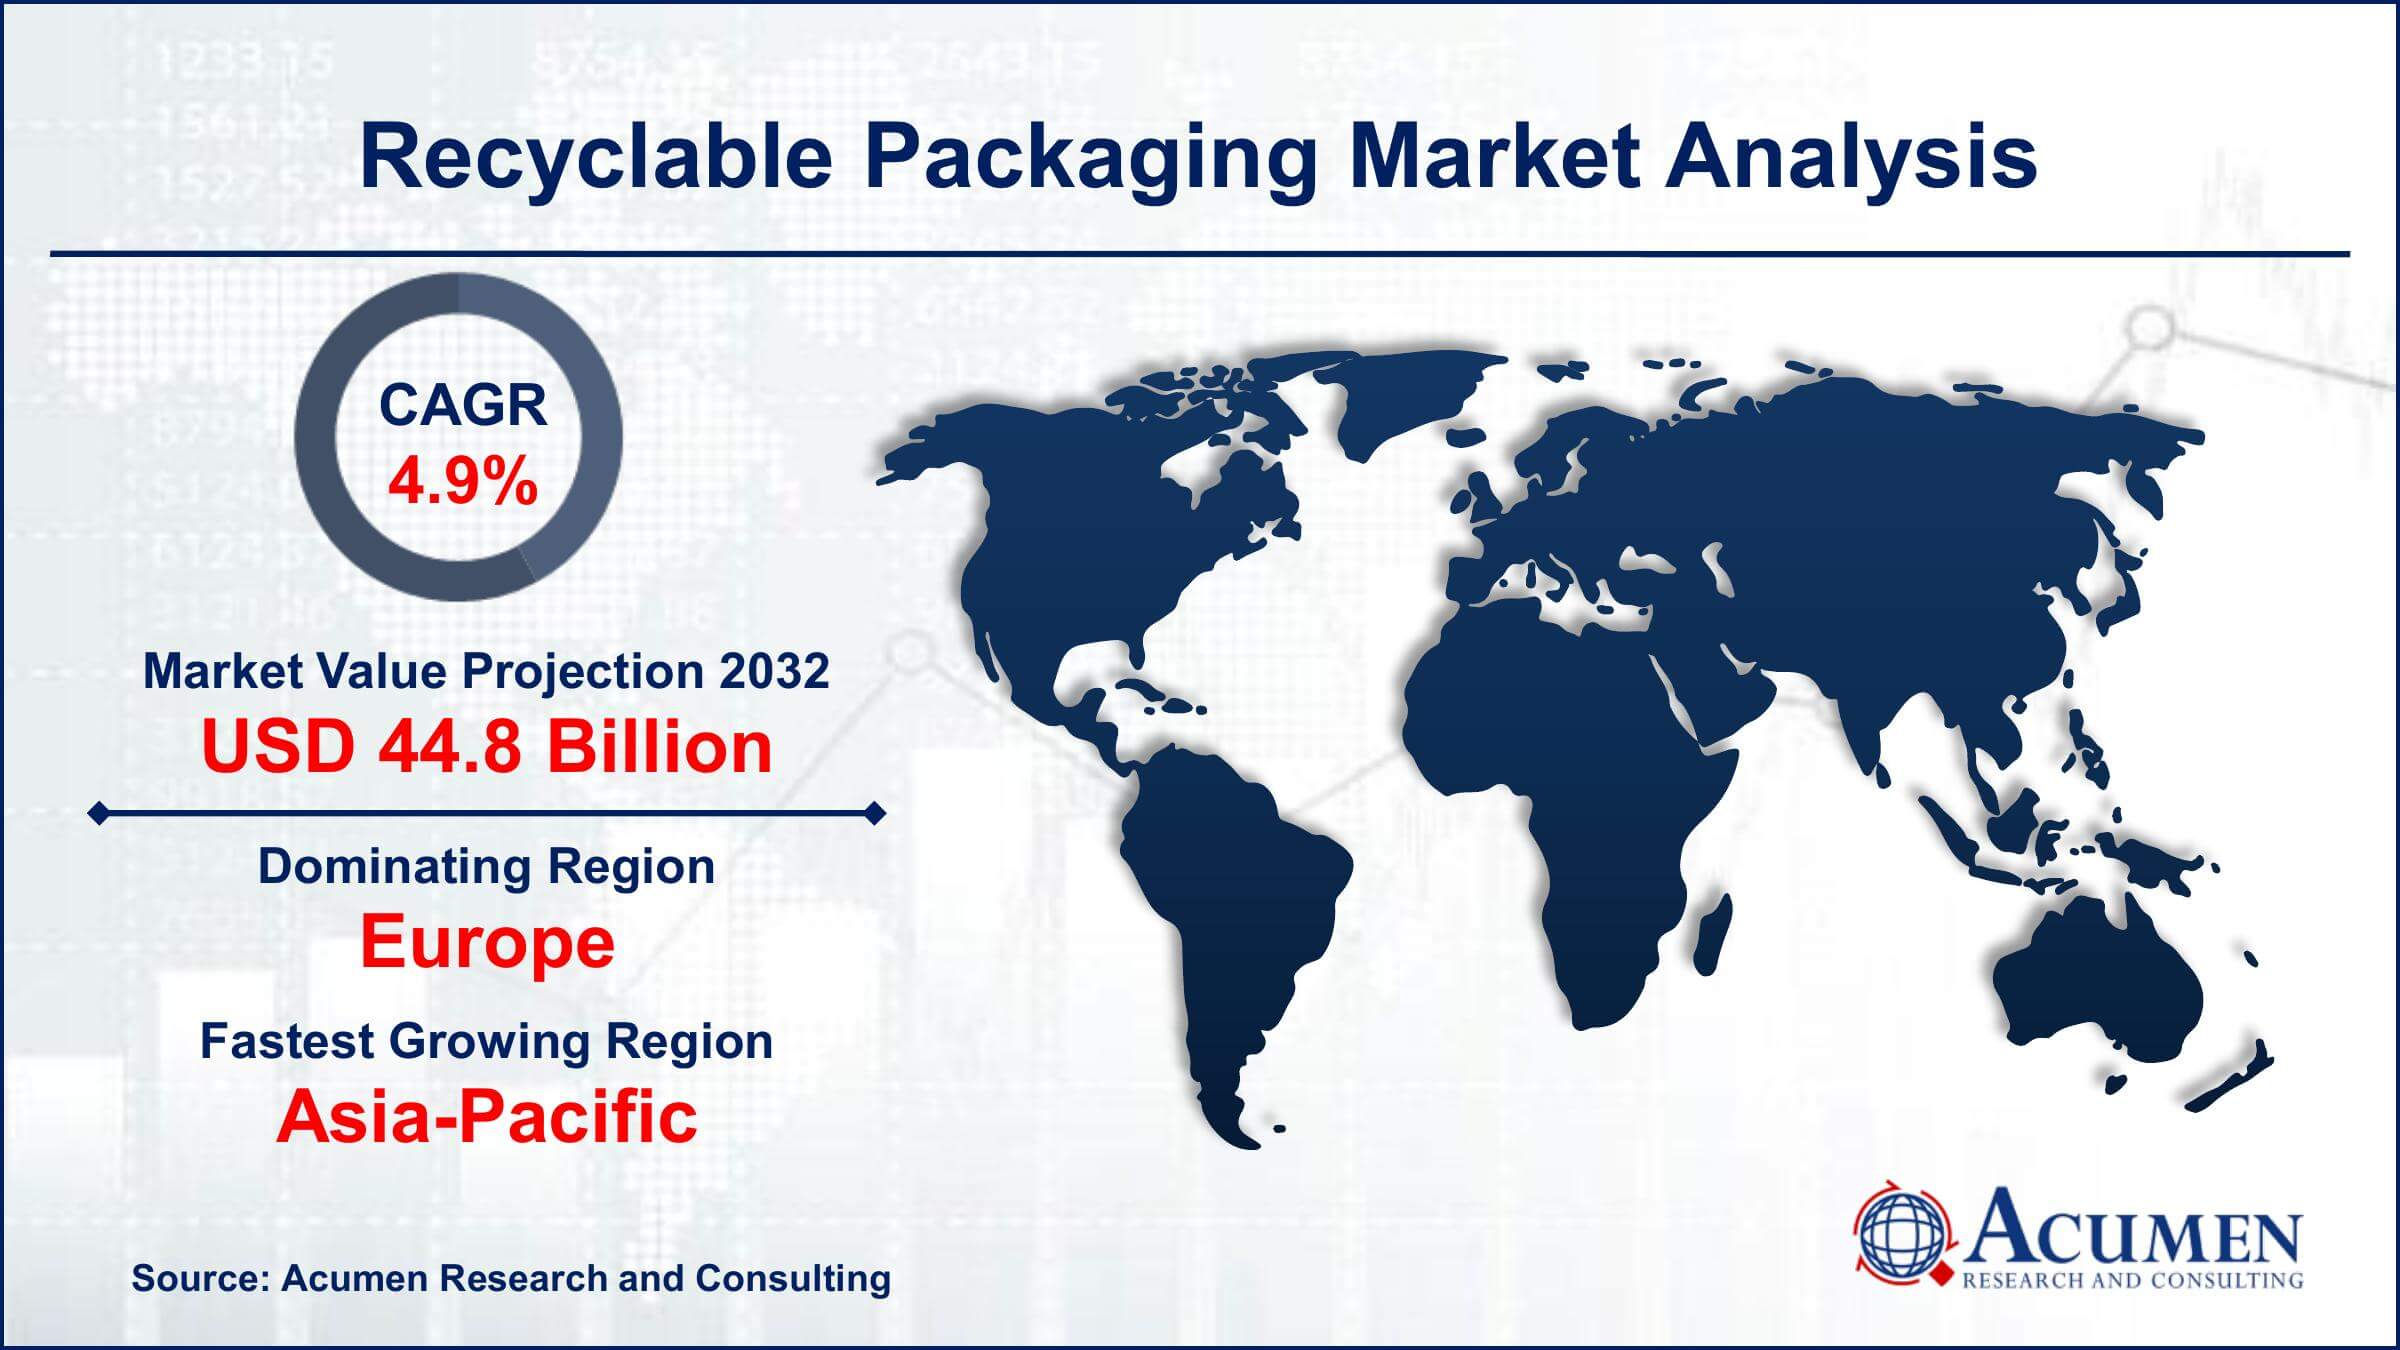 Global Recyclable Packaging Market Trends